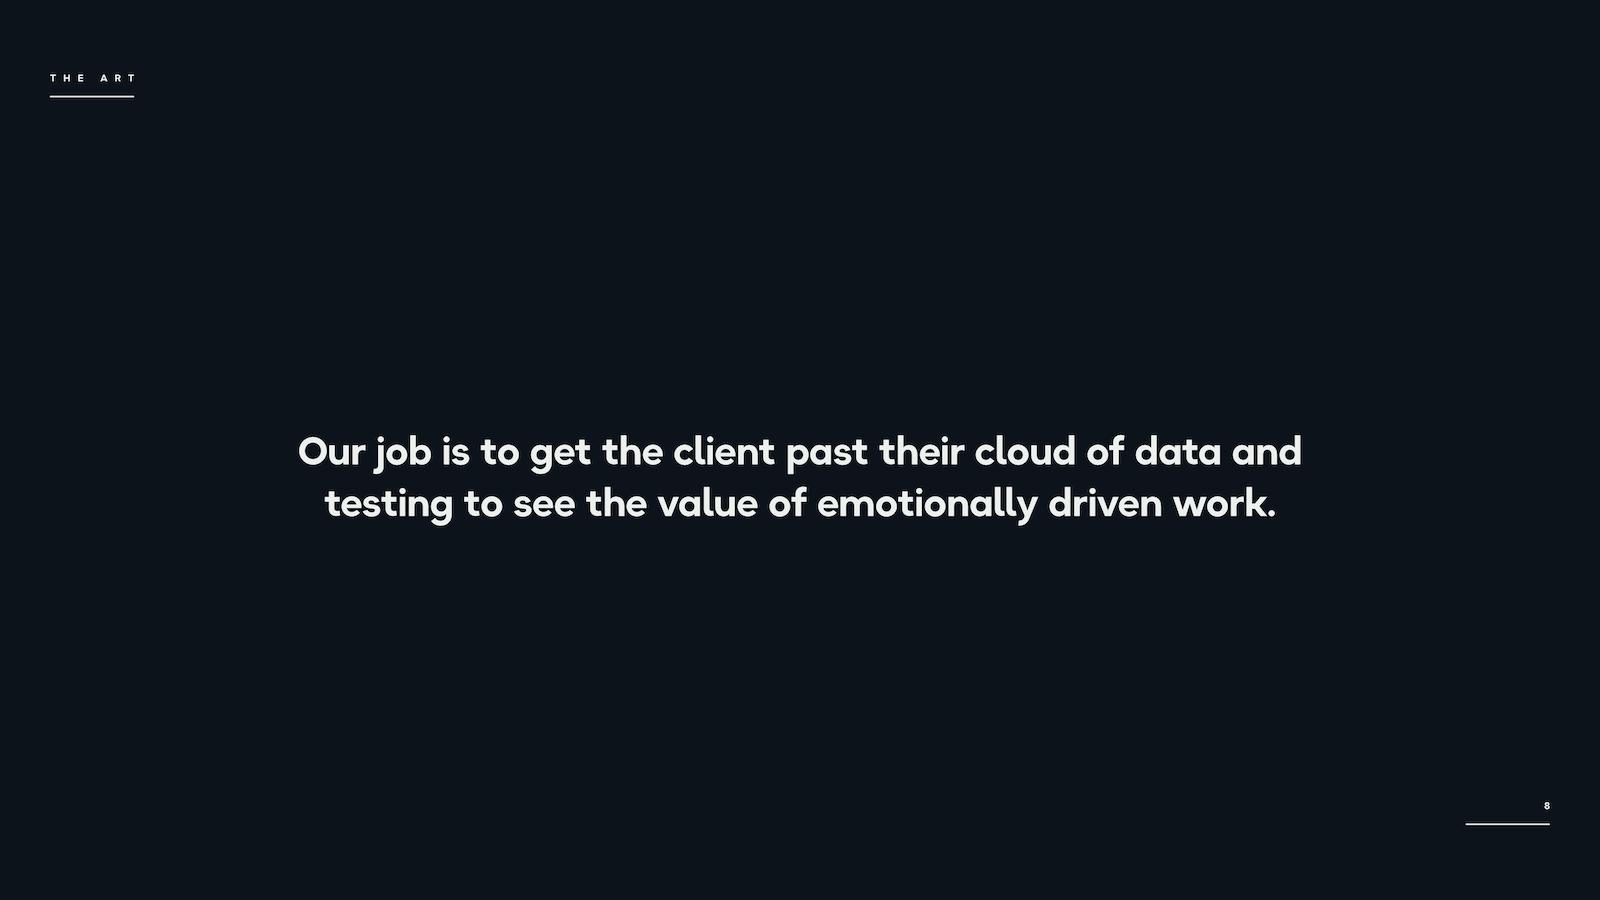 Our job is to get the client past their cloud of data and testing to see the value of emotionally driven work.